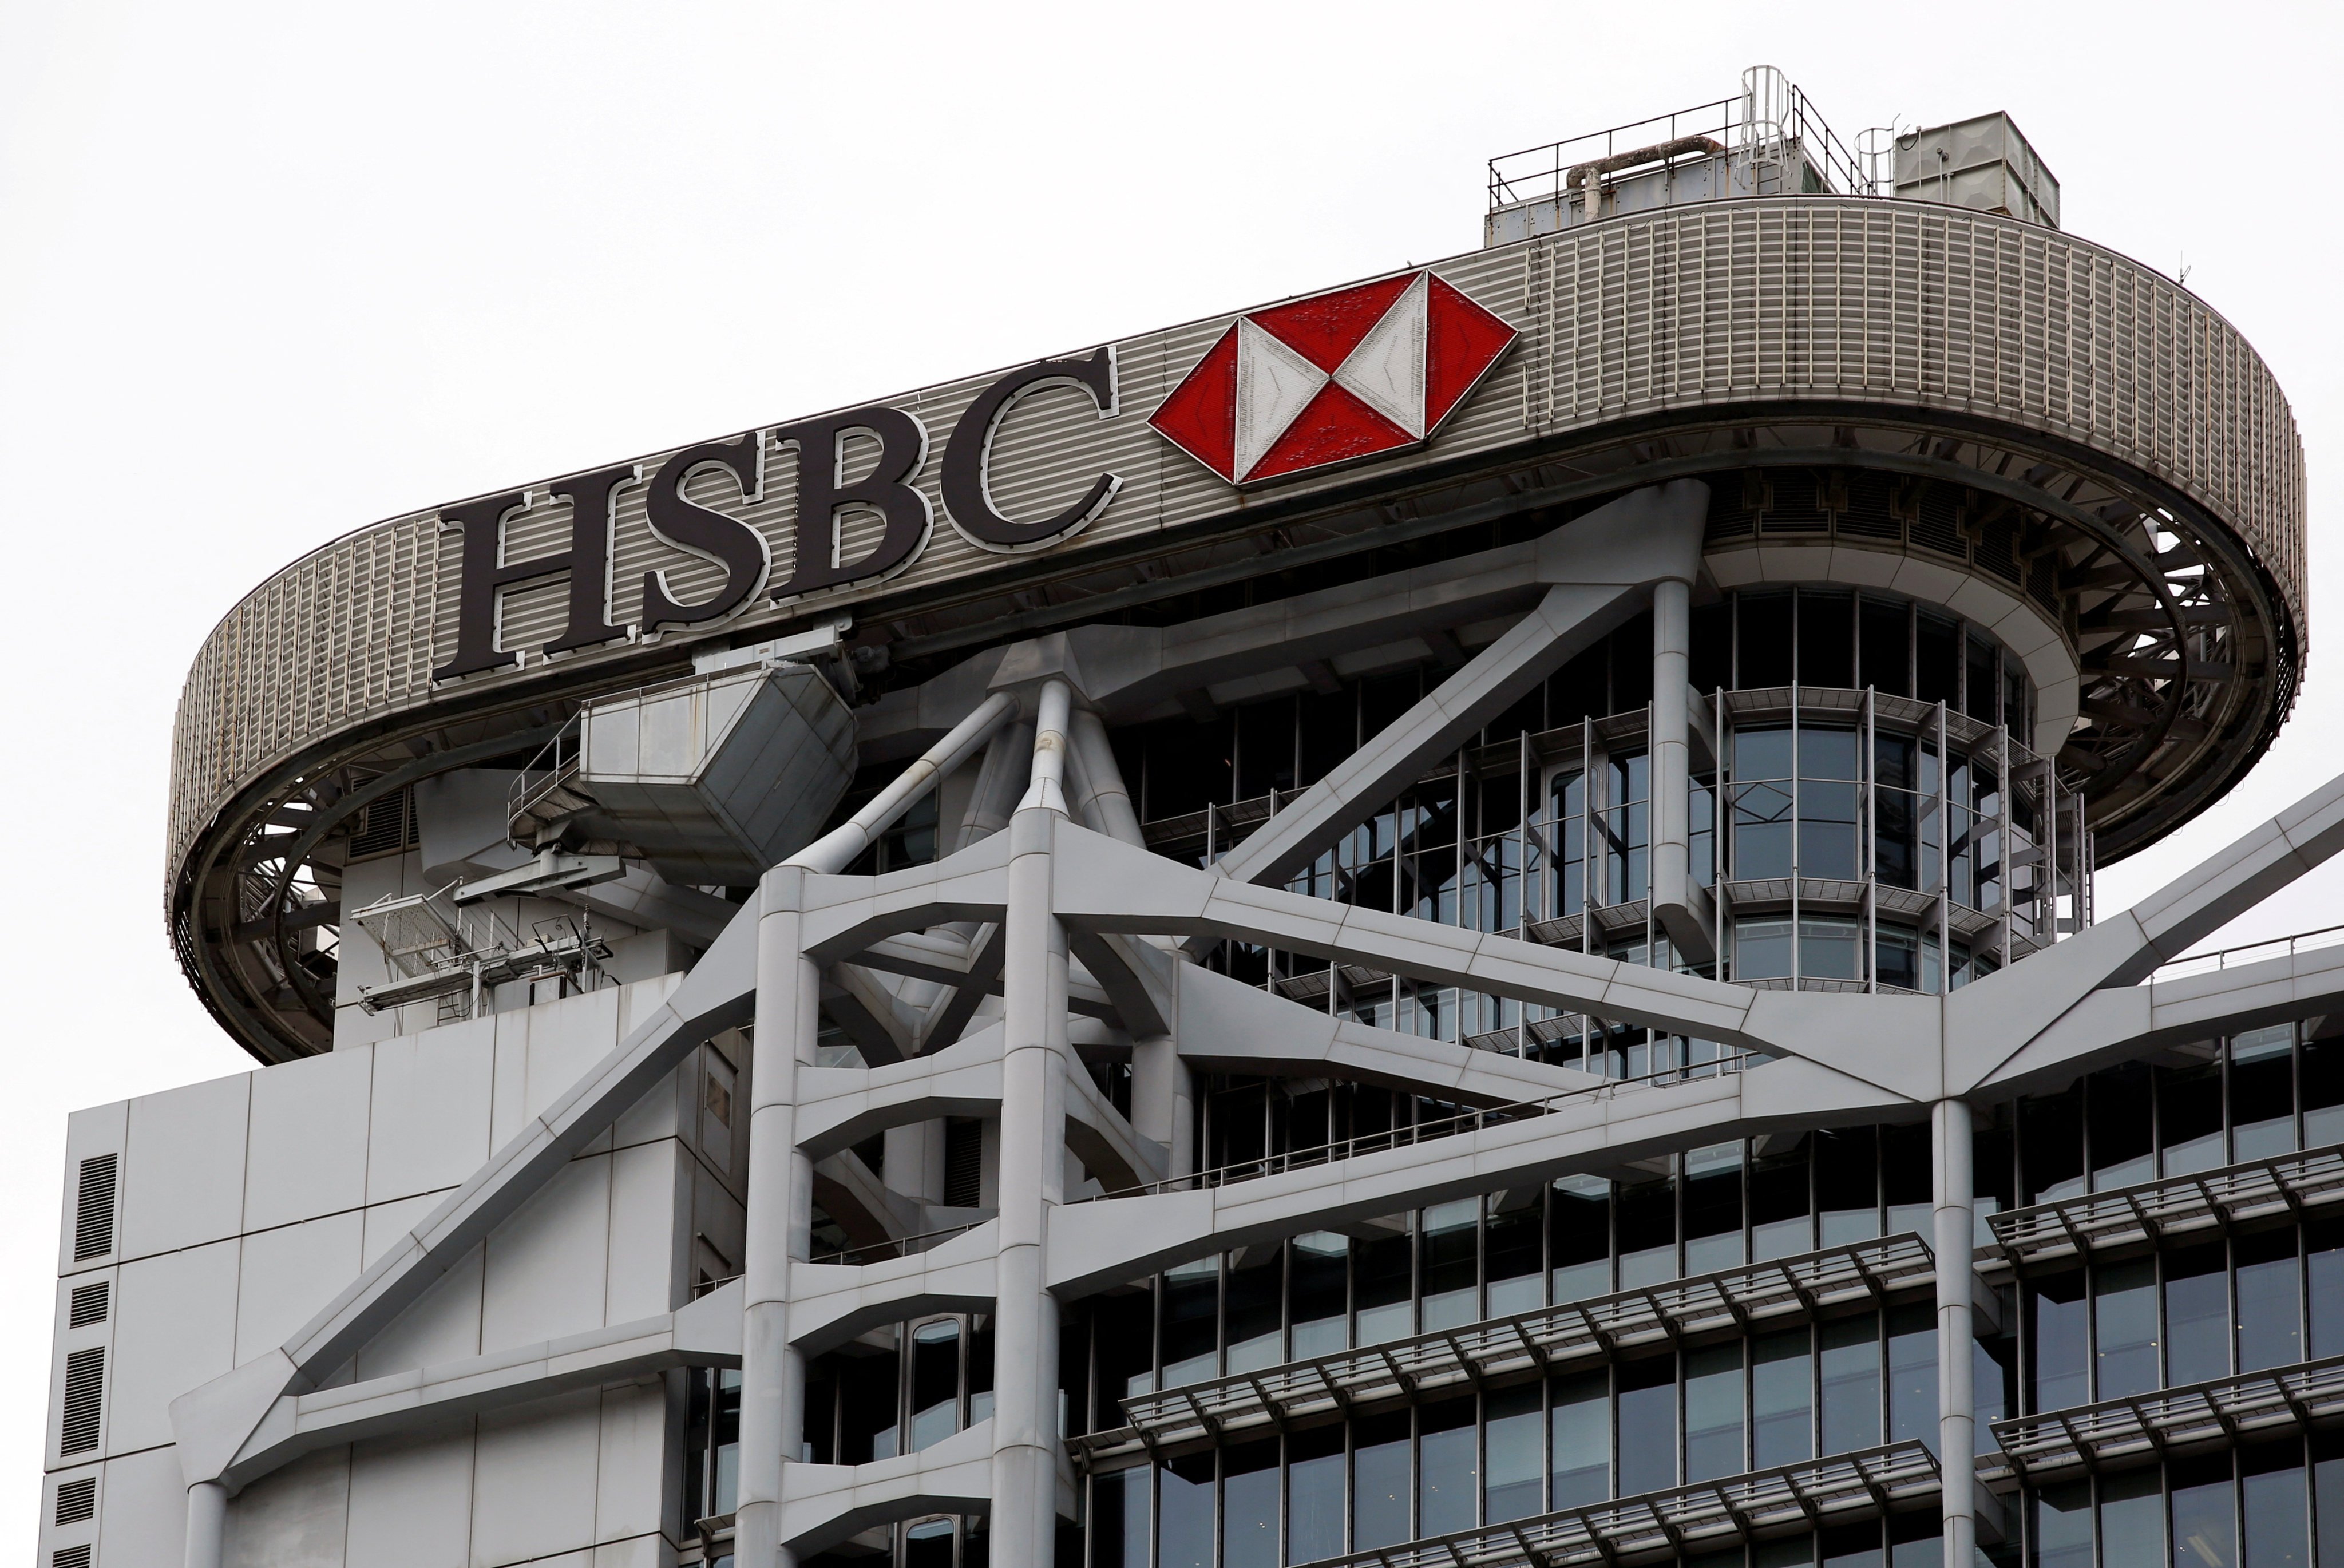 The HSBC logo is seen on its headquarters in Hong Kong. The bank’s CEO has pledged to support the city’s recovery from the Covid-induced slump. Photo: Reuters